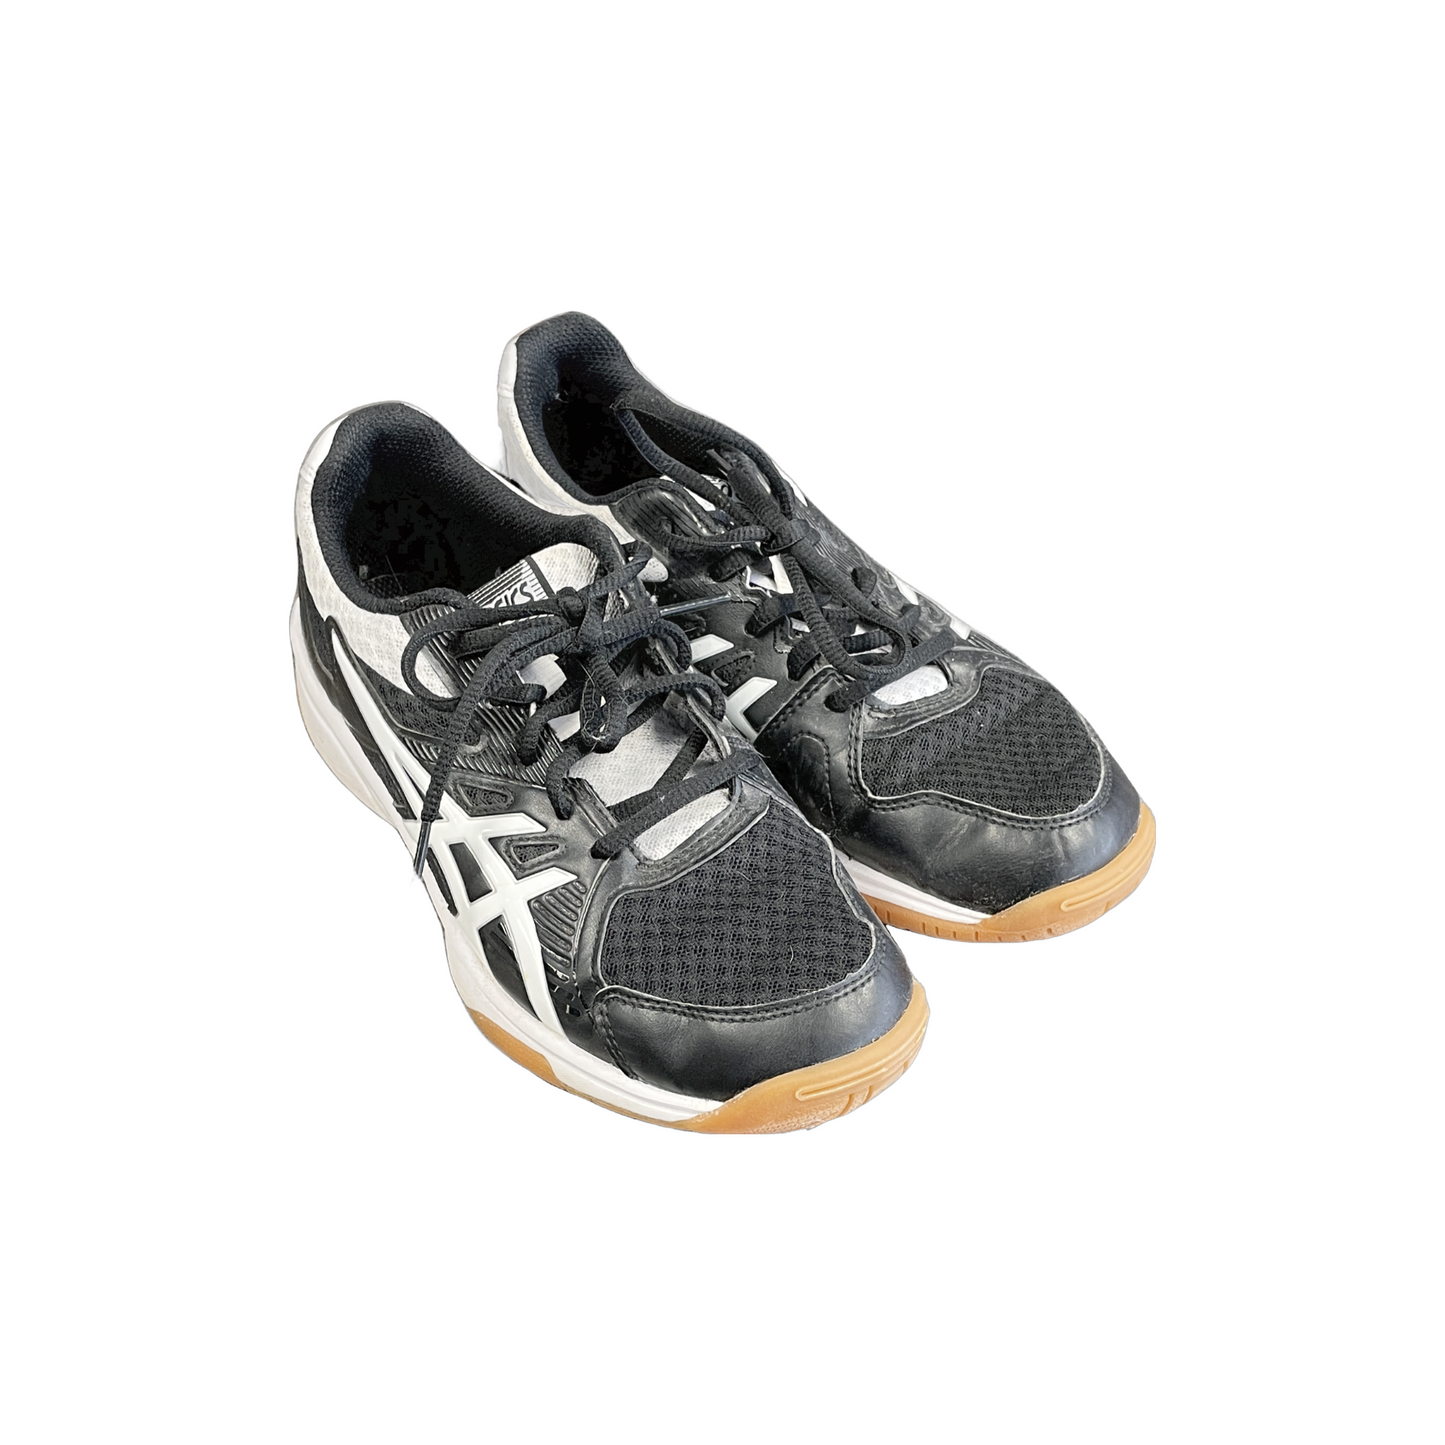 Inactivo Hombre rico medida ASICS Upcourt 3 Women's Volleyball Shoes 1072A031 – Ace in the Lowell